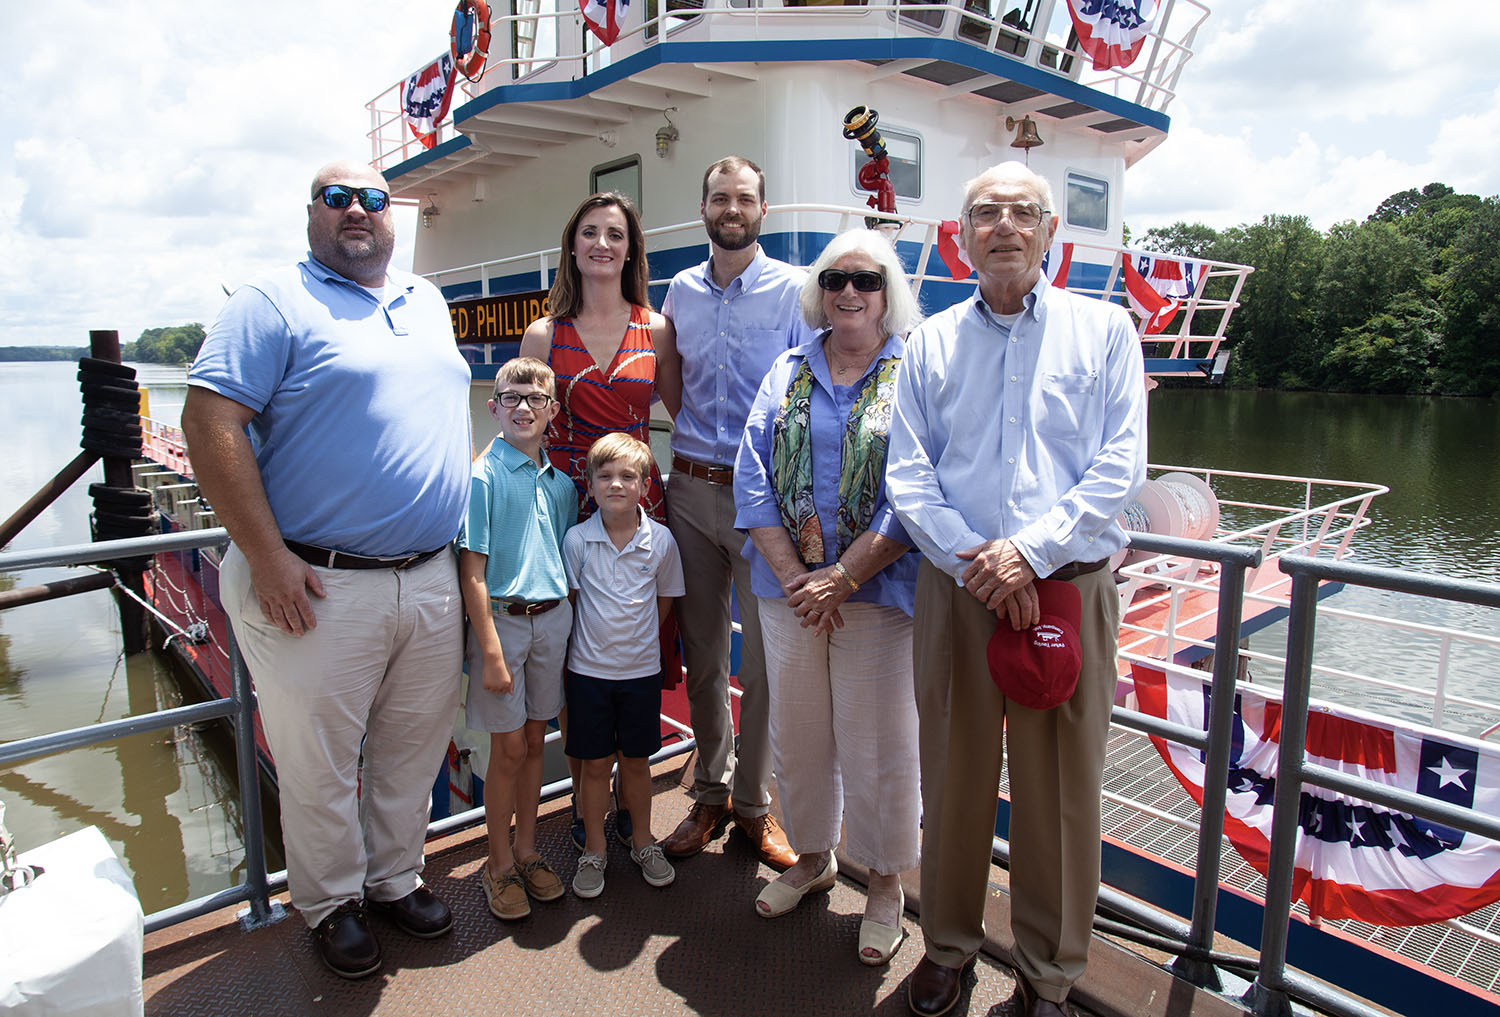 At a recent Parker Towing christening, Charlie Haun, right, stands with his family: Chas Haun (son); Alison (daughter) and Jared Phillips and their children; and wife Alice Parker Haun. (Photo by Frank McCormack)